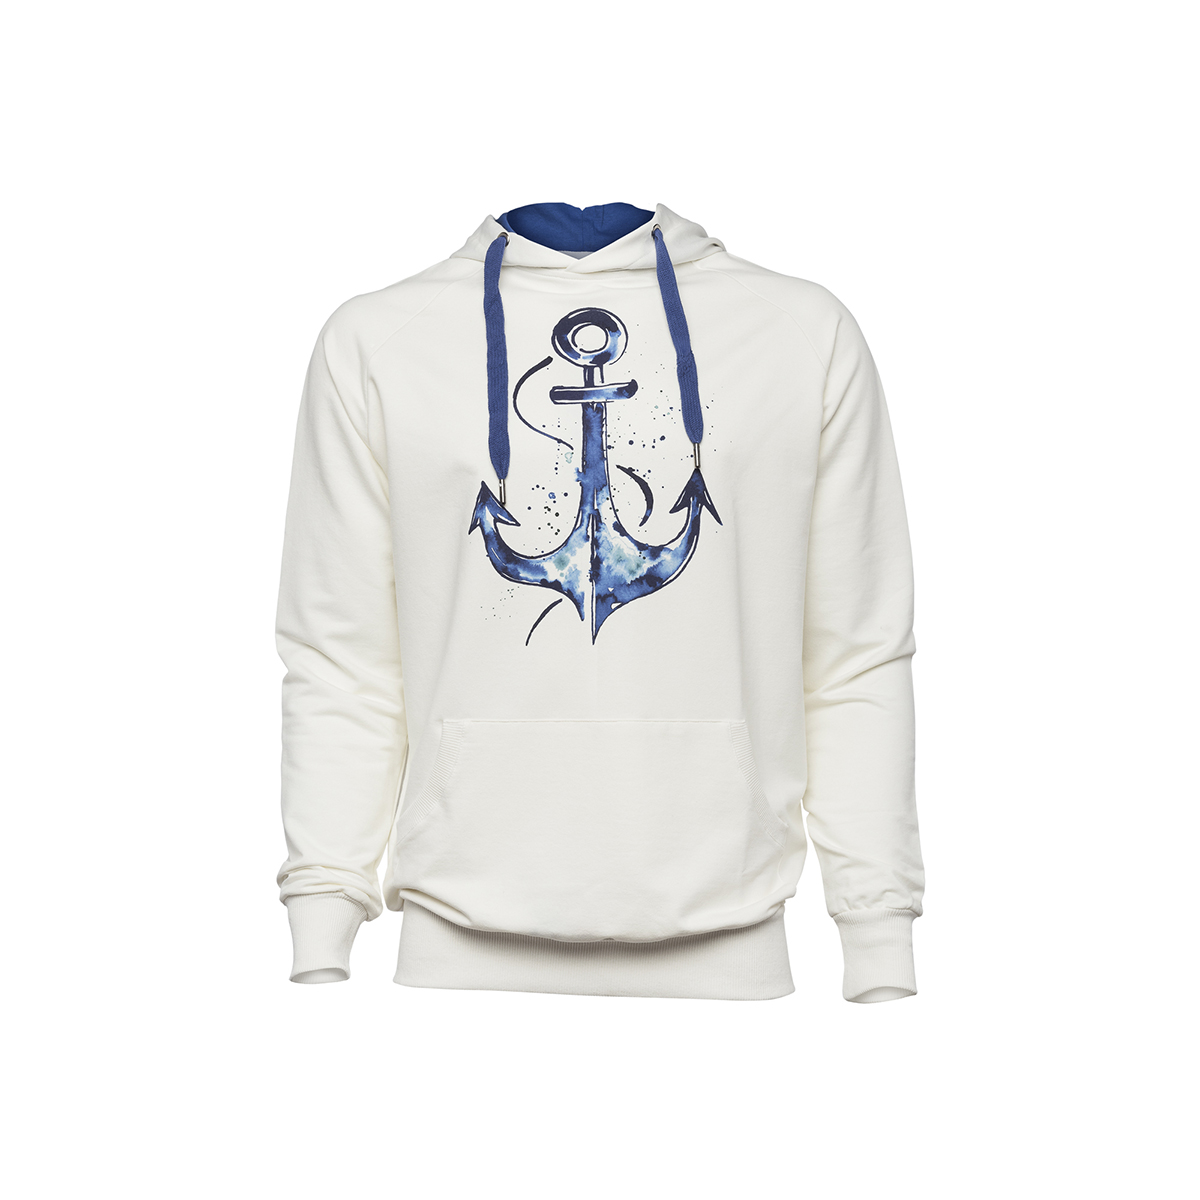 Anemoss Anchor Mens Hoodies, Sweatshirts For Men, Cotton, Breathable, Ultra Soft, Warm, Cool, Regular Fit, Hoodies For Men Boys